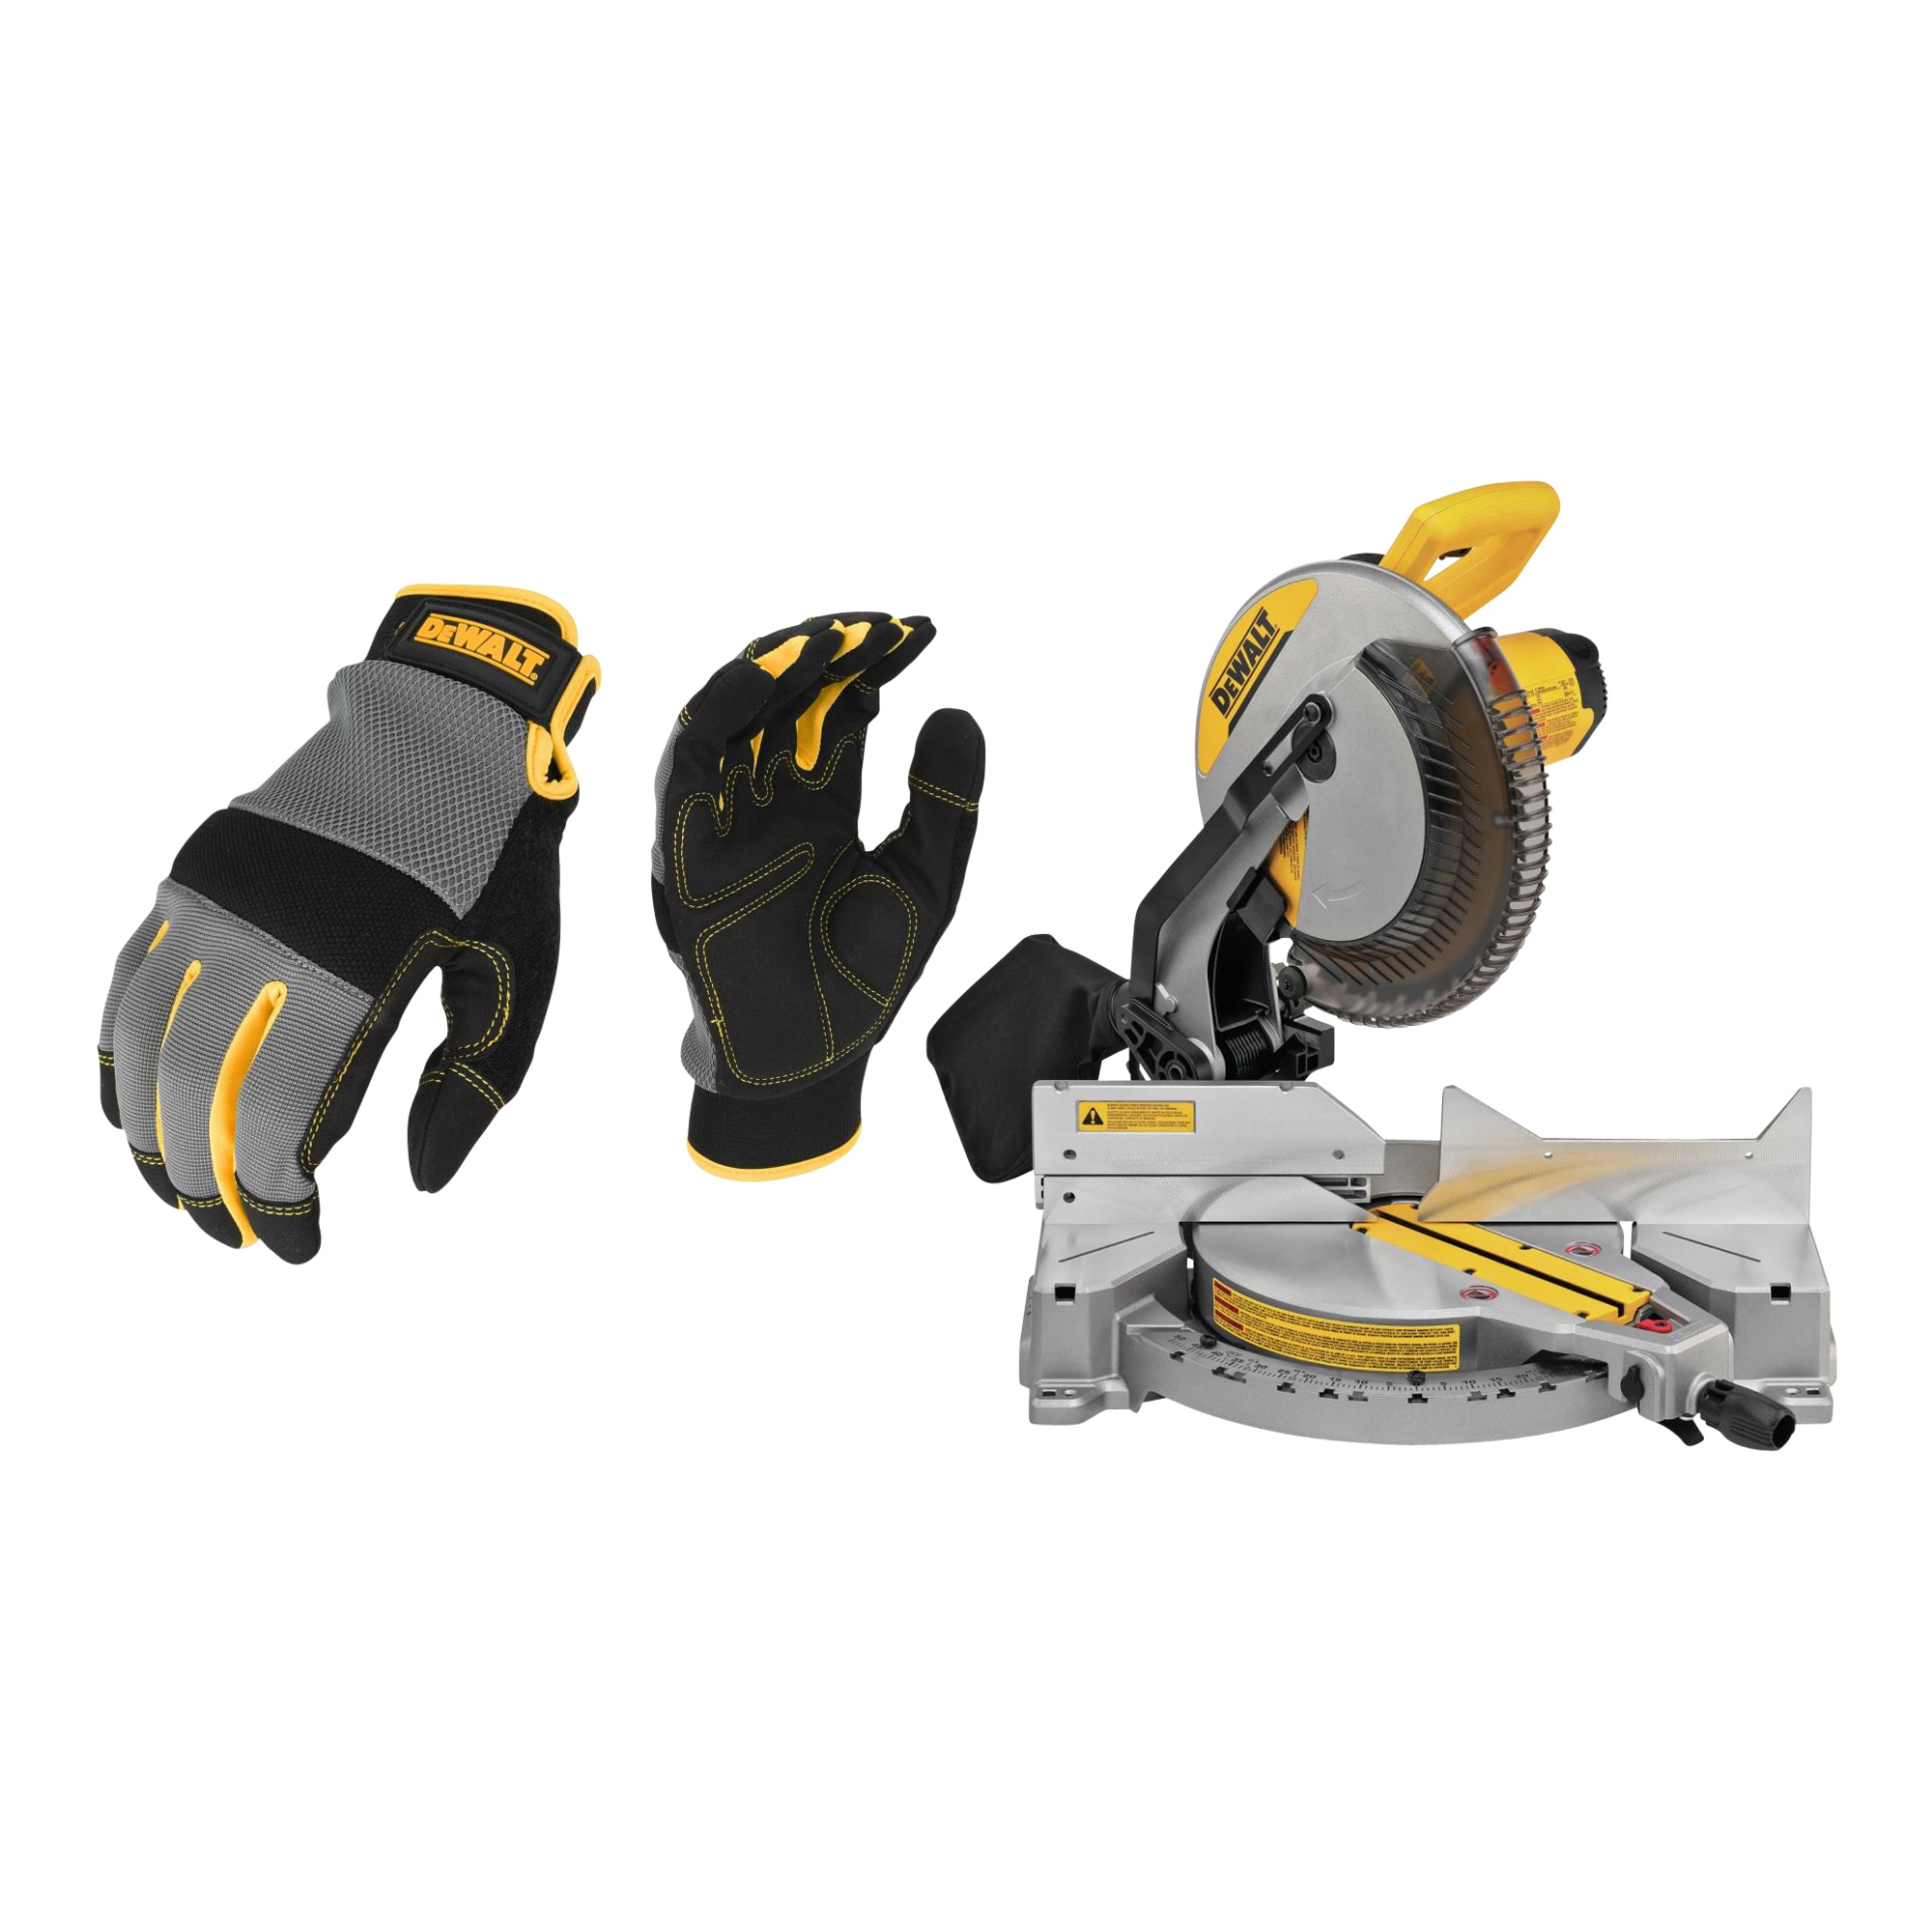 DEWALT 12-in 15 Amps Single Bevel Compound Corded Miter Saw & Men's Foam Padded Performance Glove Synthetic Leather Multipurpose Gloves, Large